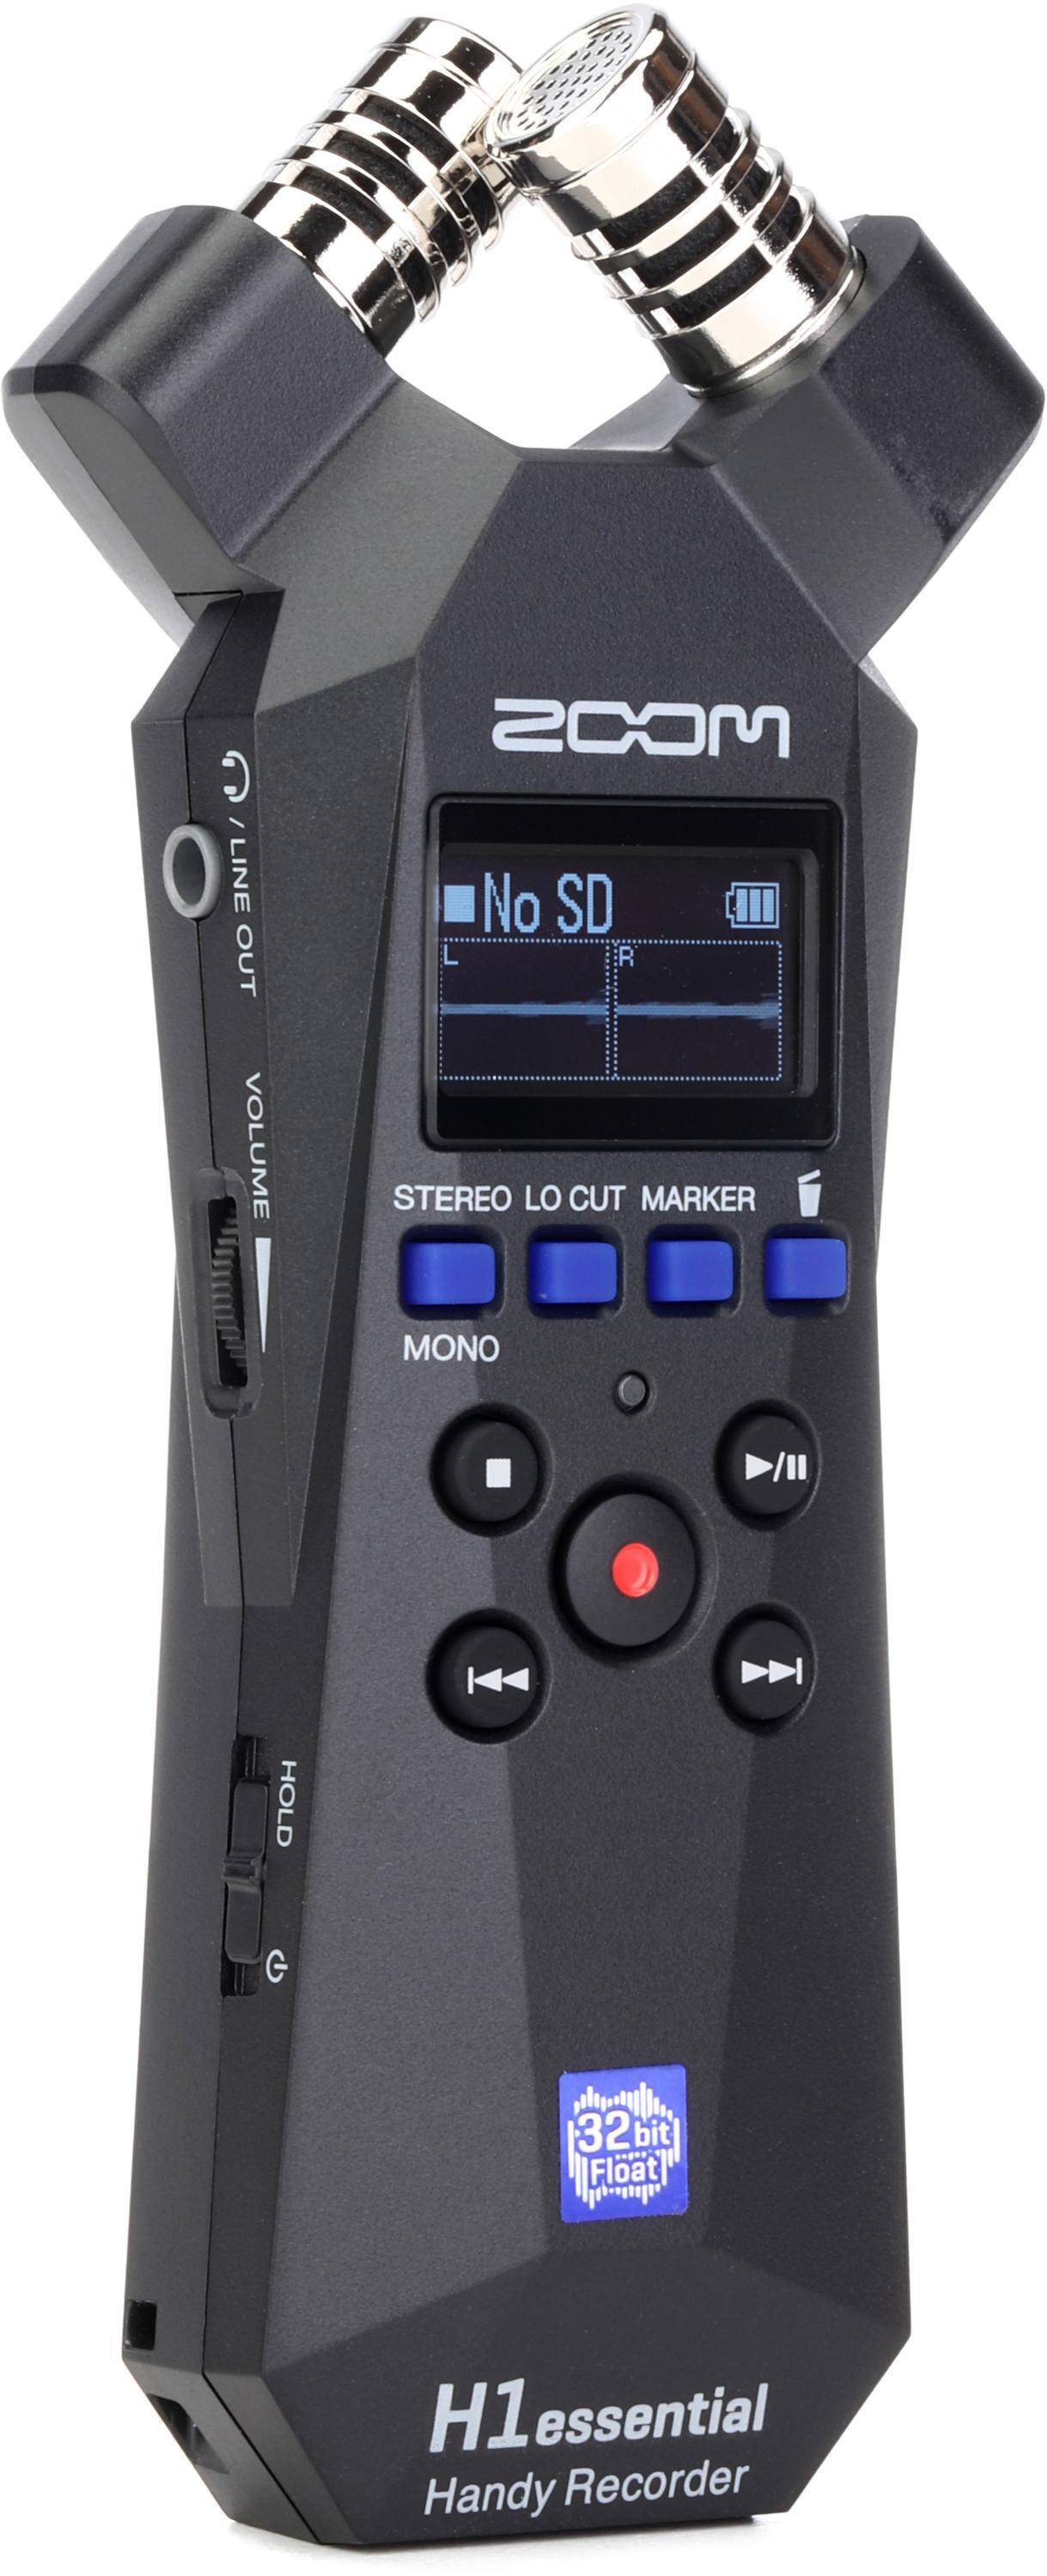 TASCAM DR-07X Stereo Handheld Recorder | Sweetwater